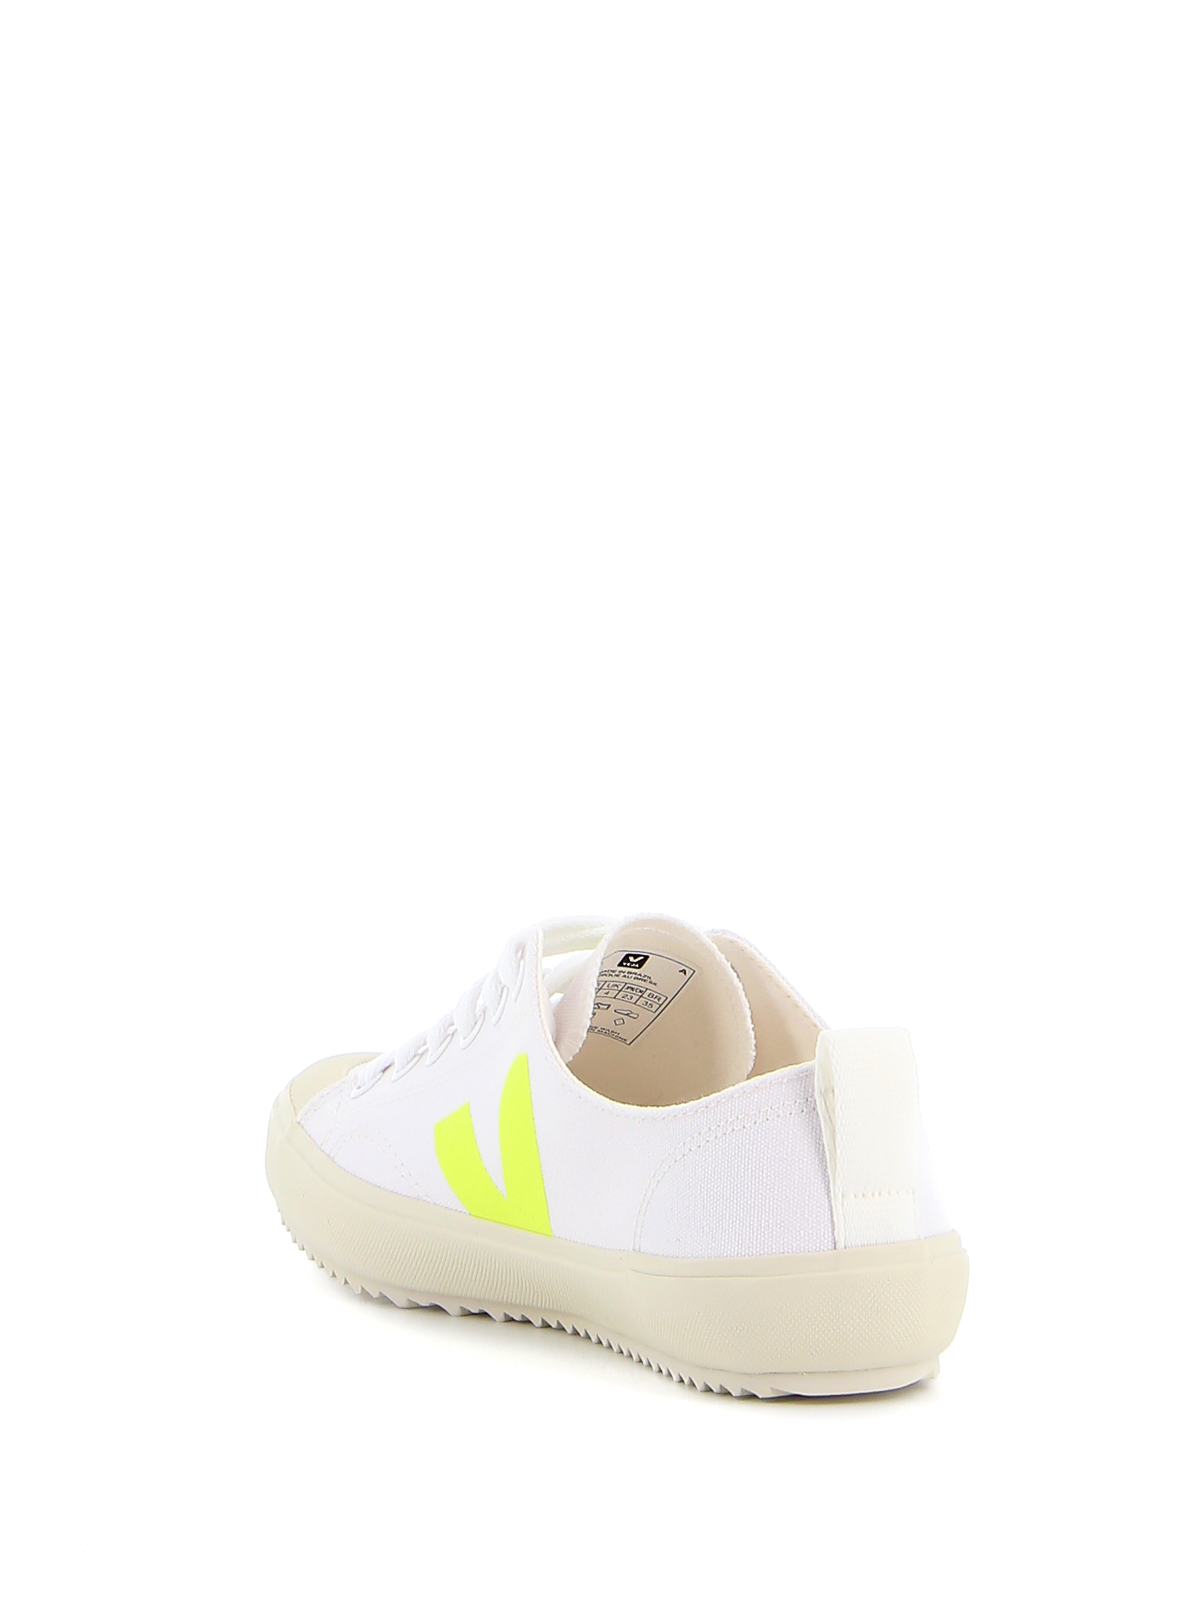 Trainers Veja Nova cotton sneakers - NAW012282 | Shop online at iKRIX